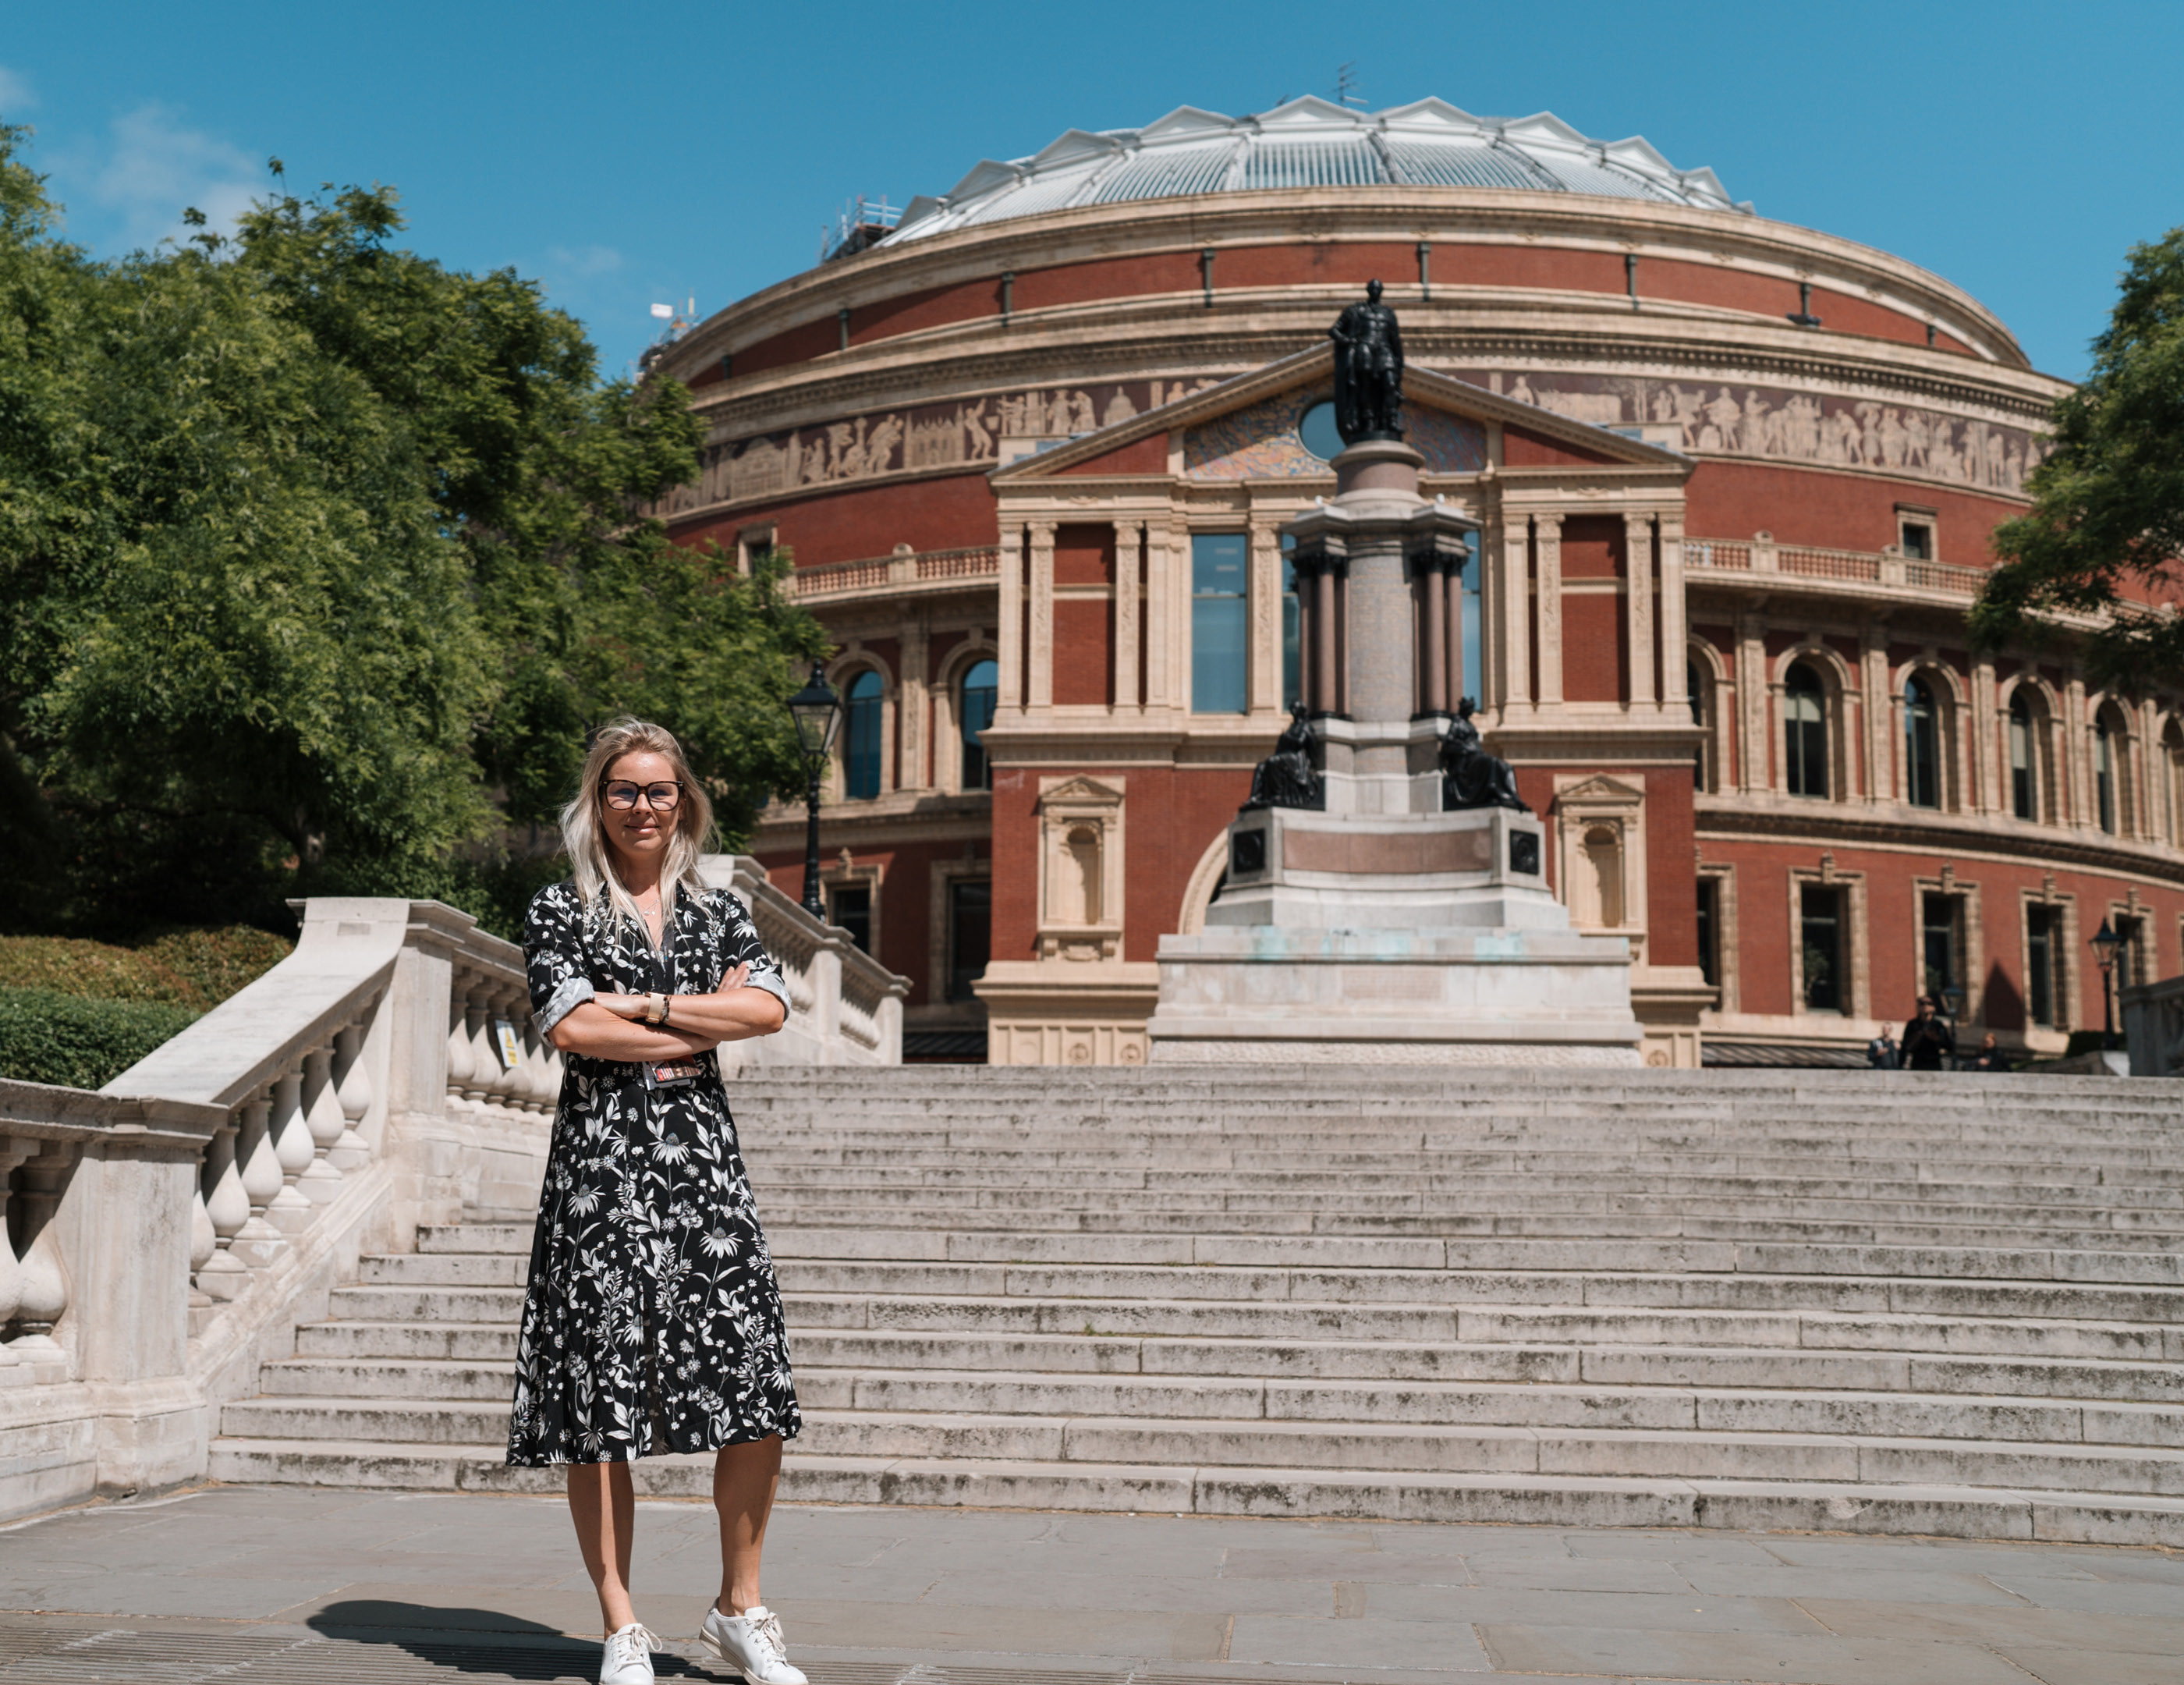 Woman stands with arms folded in front of the stairs outside the royal albert hall